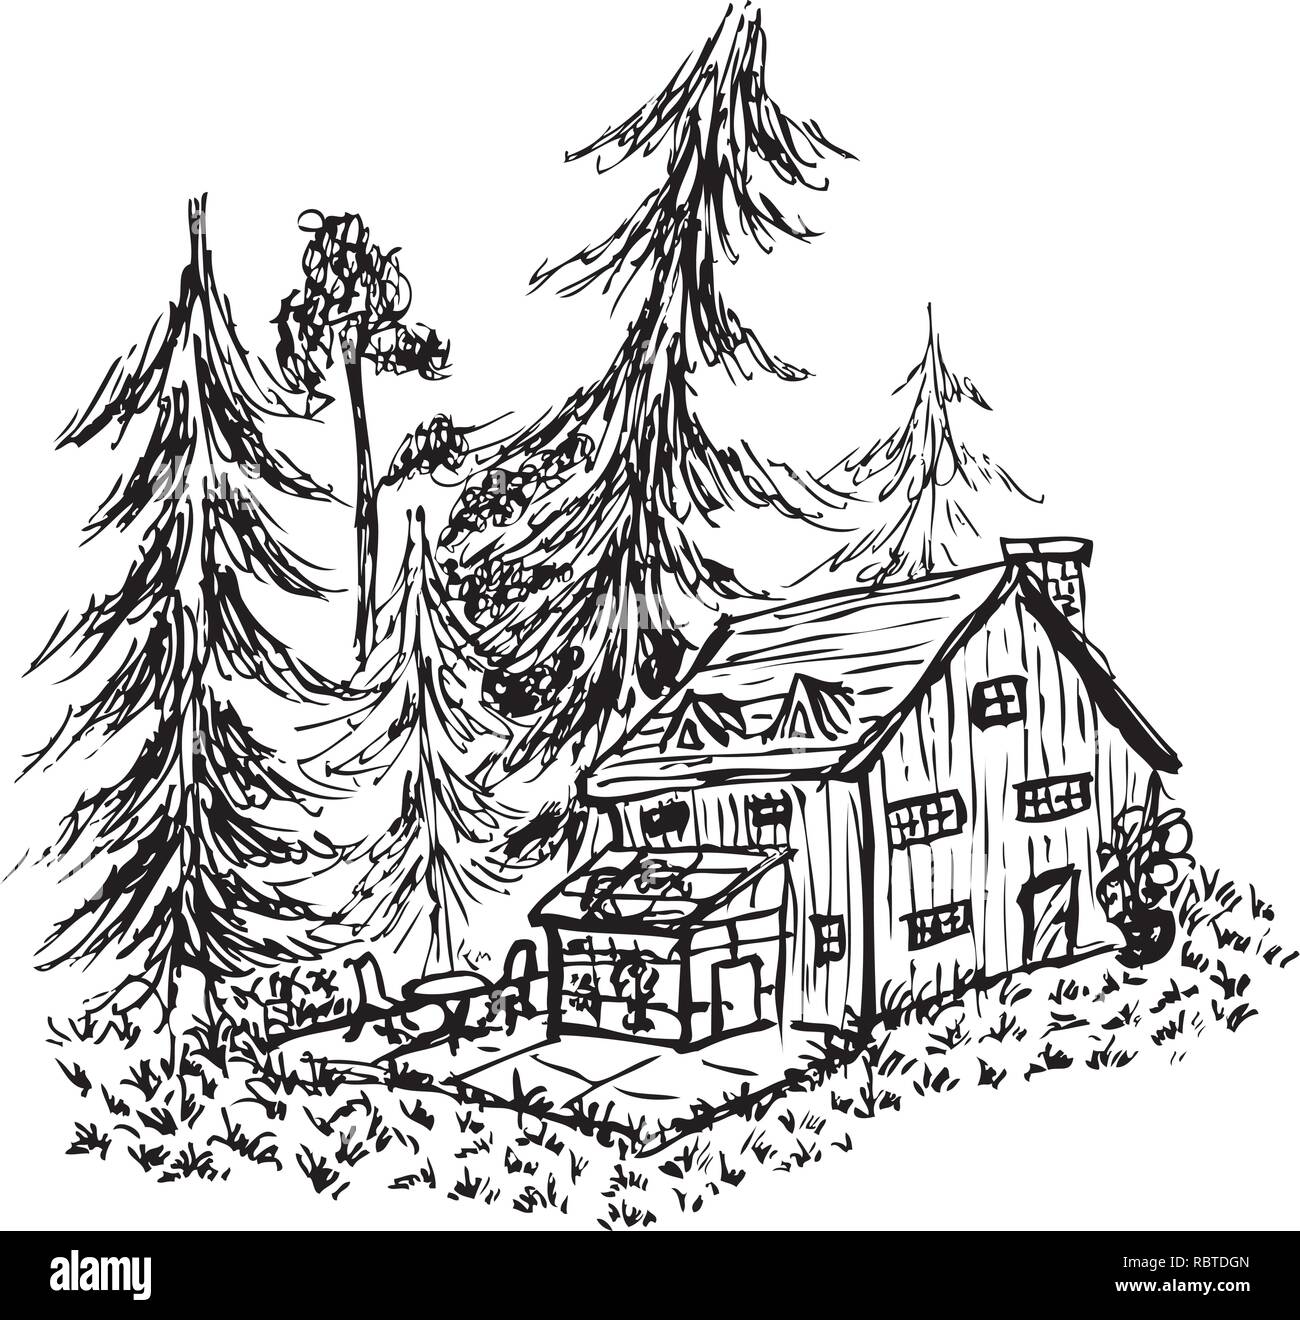 Sketch of a lodge at a forest glade by jziprian Stock Vector